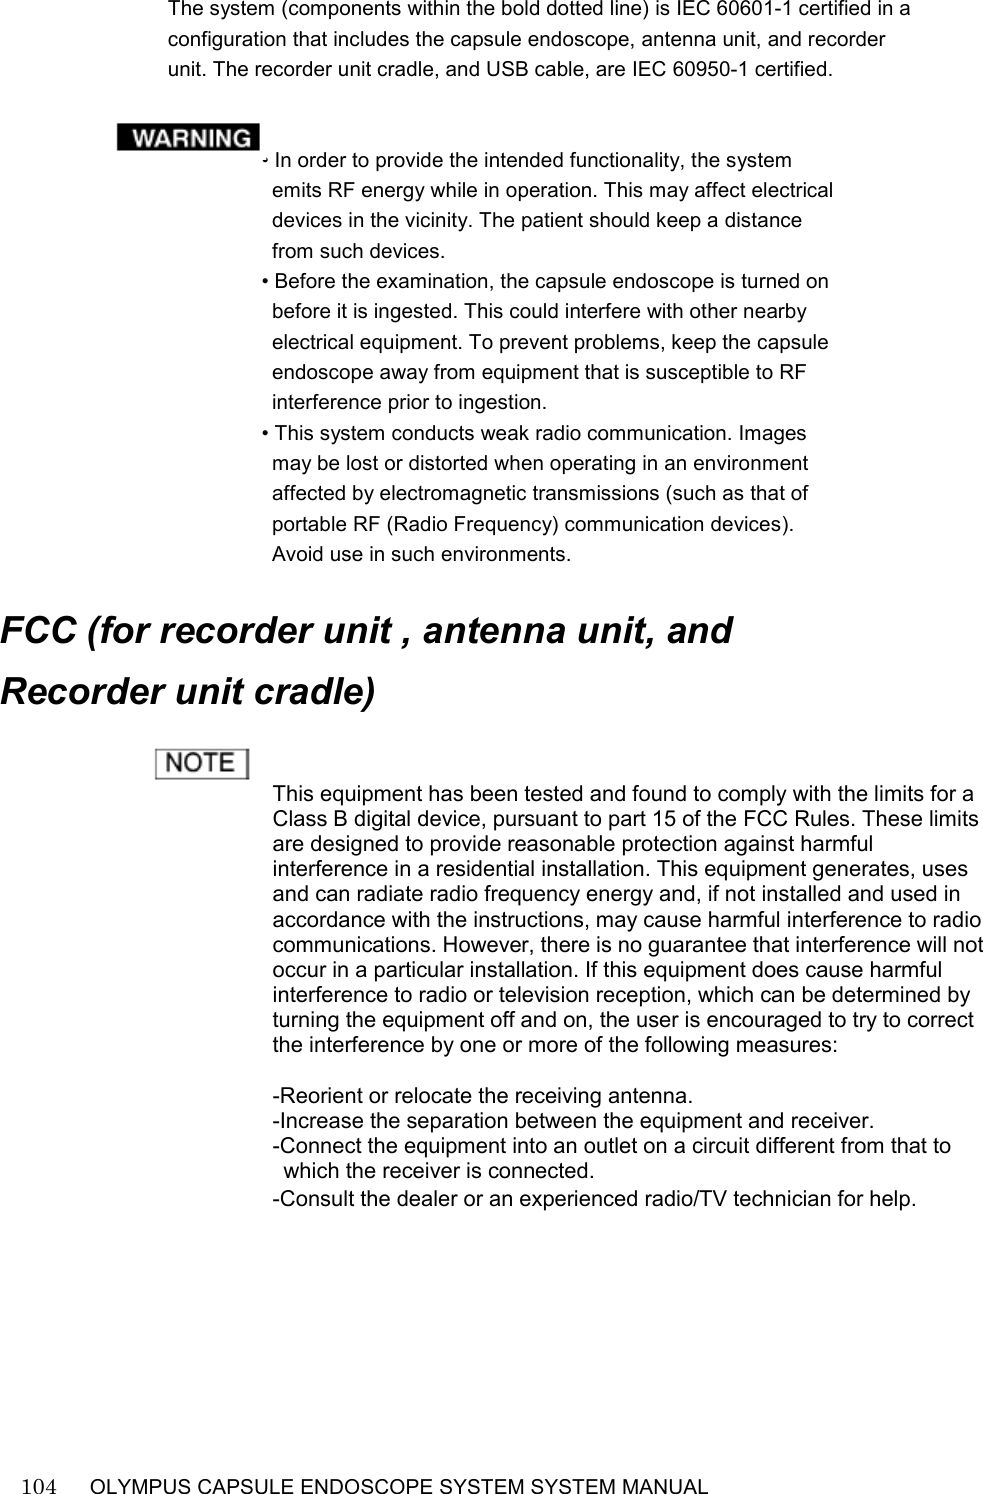    104   OLYMPUS CAPSULE ENDOSCOPE SYSTEM SYSTEM MANUAL                                                         The system (components within the bold dotted line) is IEC 60601-1 certified in a configuration that includes the capsule endoscope, antenna unit, and recorder unit. The recorder unit cradle, and USB cable, are IEC 60950-1 certified.   • In order to provide the intended functionality, the system emits RF energy while in operation. This may affect electrical devices in the vicinity. The patient should keep a distance from such devices. • Before the examination, the capsule endoscope is turned on before it is ingested. This could interfere with other nearby electrical equipment. To prevent problems, keep the capsule endoscope away from equipment that is susceptible to RF interference prior to ingestion. • This system conducts weak radio communication. Images may be lost or distorted when operating in an environment affected by electromagnetic transmissions (such as that of portable RF (Radio Frequency) communication devices). Avoid use in such environments.  FCC (for recorder unit , antenna unit, and   Recorder unit cradle)  This equipment has been tested and found to comply with the limits for a Class B digital device, pursuant to part 15 of the FCC Rules. These limits are designed to provide reasonable protection against harmful interference in a residential installation. This equipment generates, uses and can radiate radio frequency energy and, if not installed and used in accordance with the instructions, may cause harmful interference to radio communications. However, there is no guarantee that interference will not occur in a particular installation. If this equipment does cause harmful interference to radio or television reception, which can be determined by turning the equipment off and on, the user is encouraged to try to correct the interference by one or more of the following measures:  -Reorient or relocate the receiving antenna. -Increase the separation between the equipment and receiver. -Connect the equipment into an outlet on a circuit different from that to which the receiver is connected. -Consult the dealer or an experienced radio/TV technician for help.         